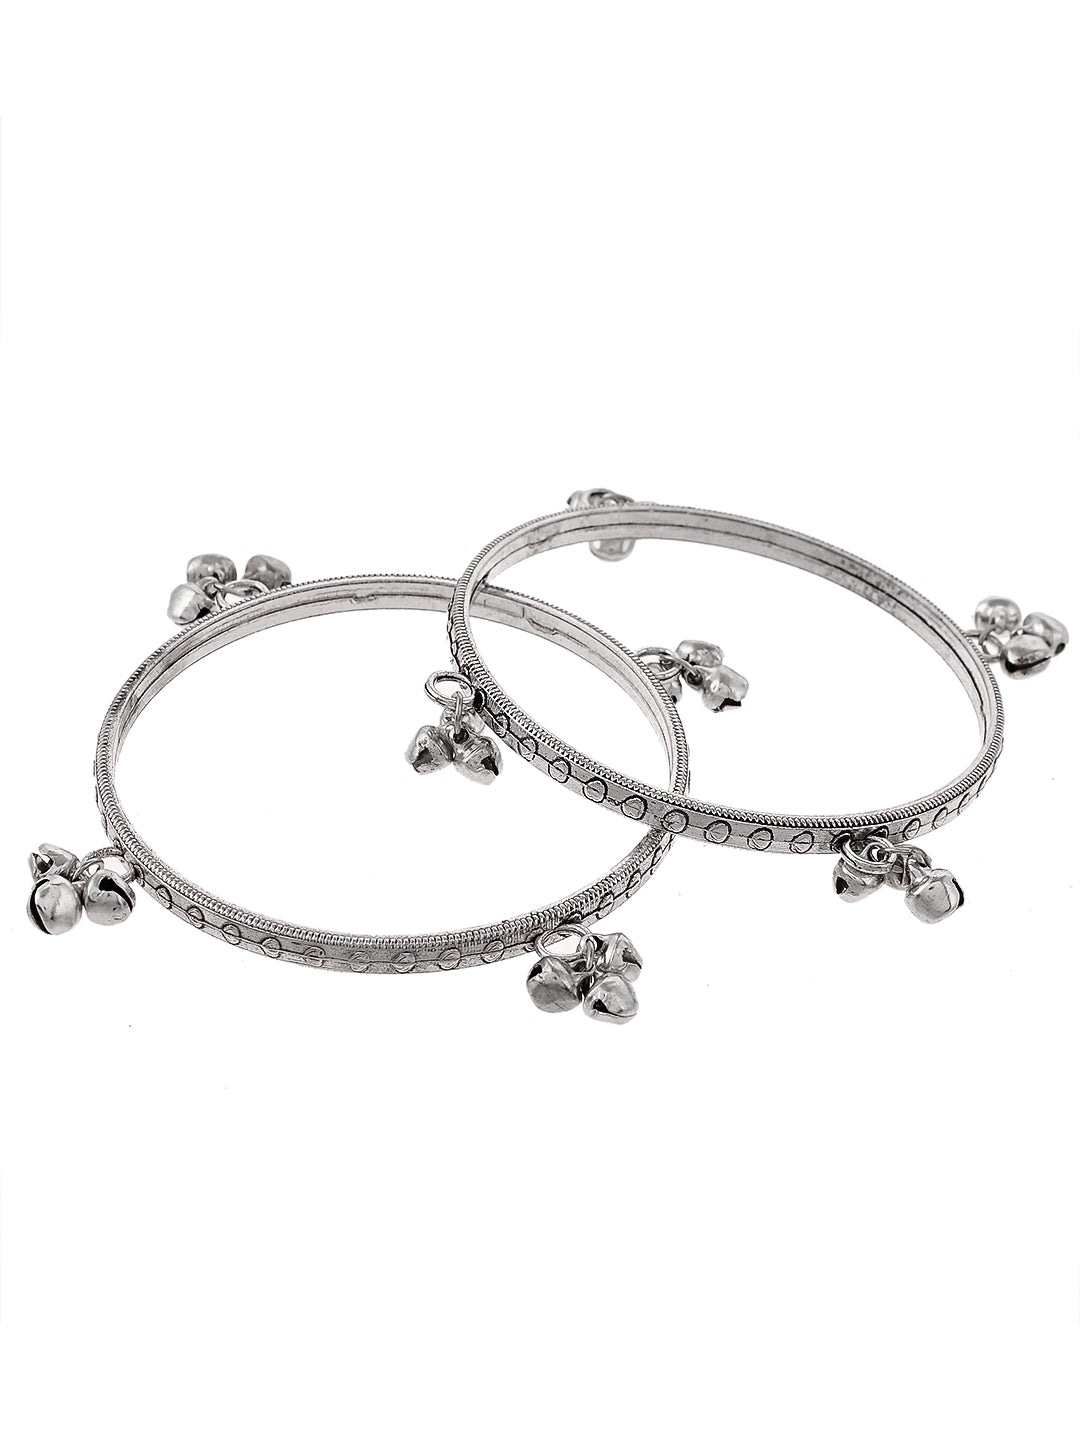 GERMAN SILVER OXIDIZED FULL GHUNGROO BANGLES: Buy GERMAN SILVER OXIDIZED  FULL GHUNGROO BANGLES Online in India on Snapdeal